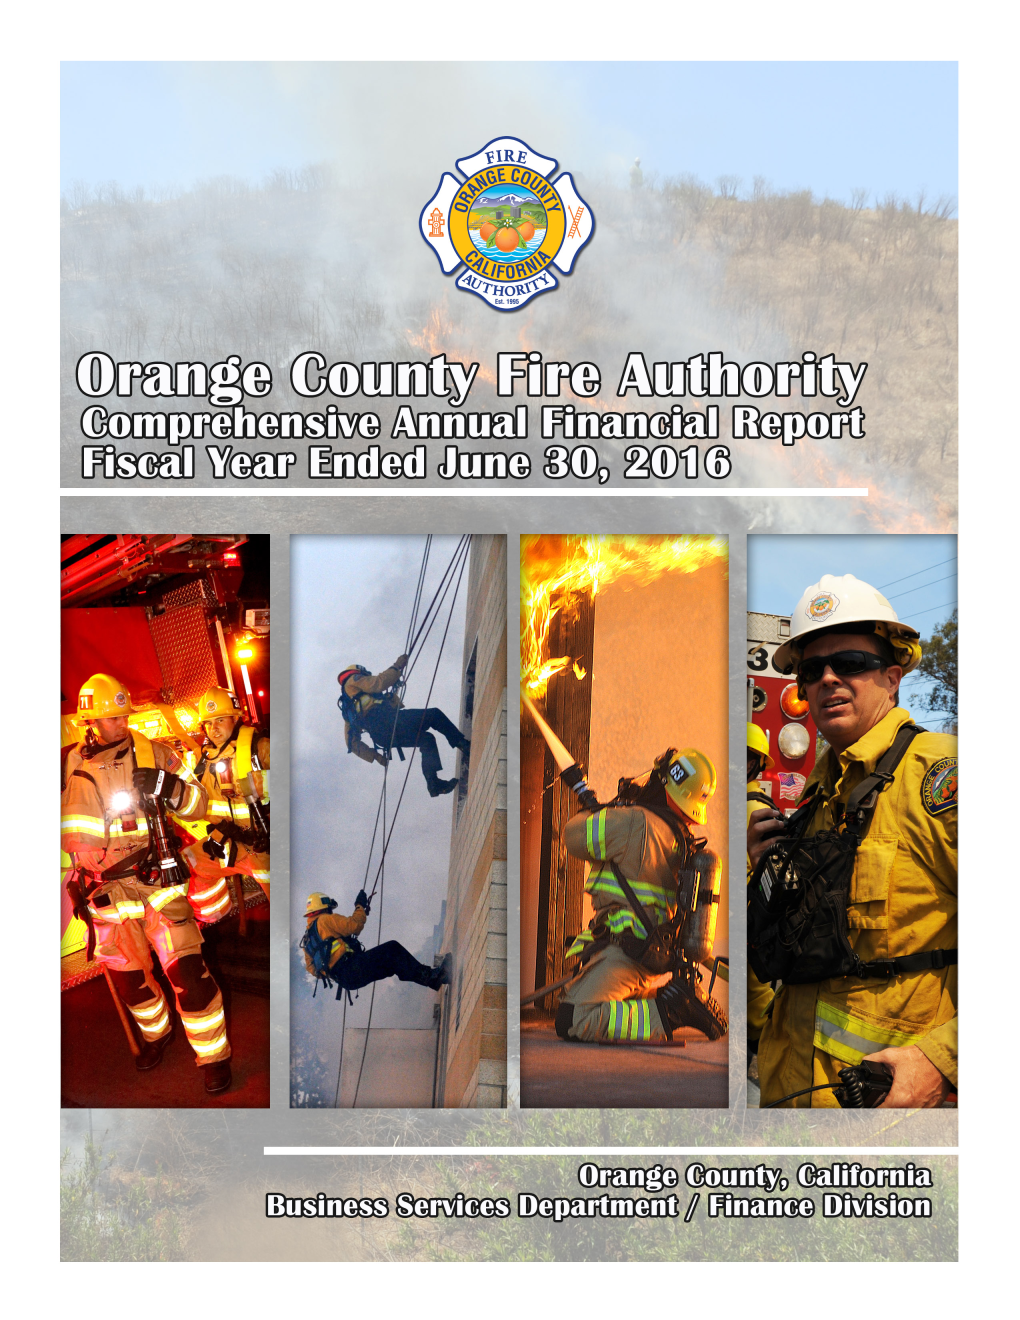 Orange County Fire Authority Comprehensive Annual Financial Report Year Ended June 30, 2016